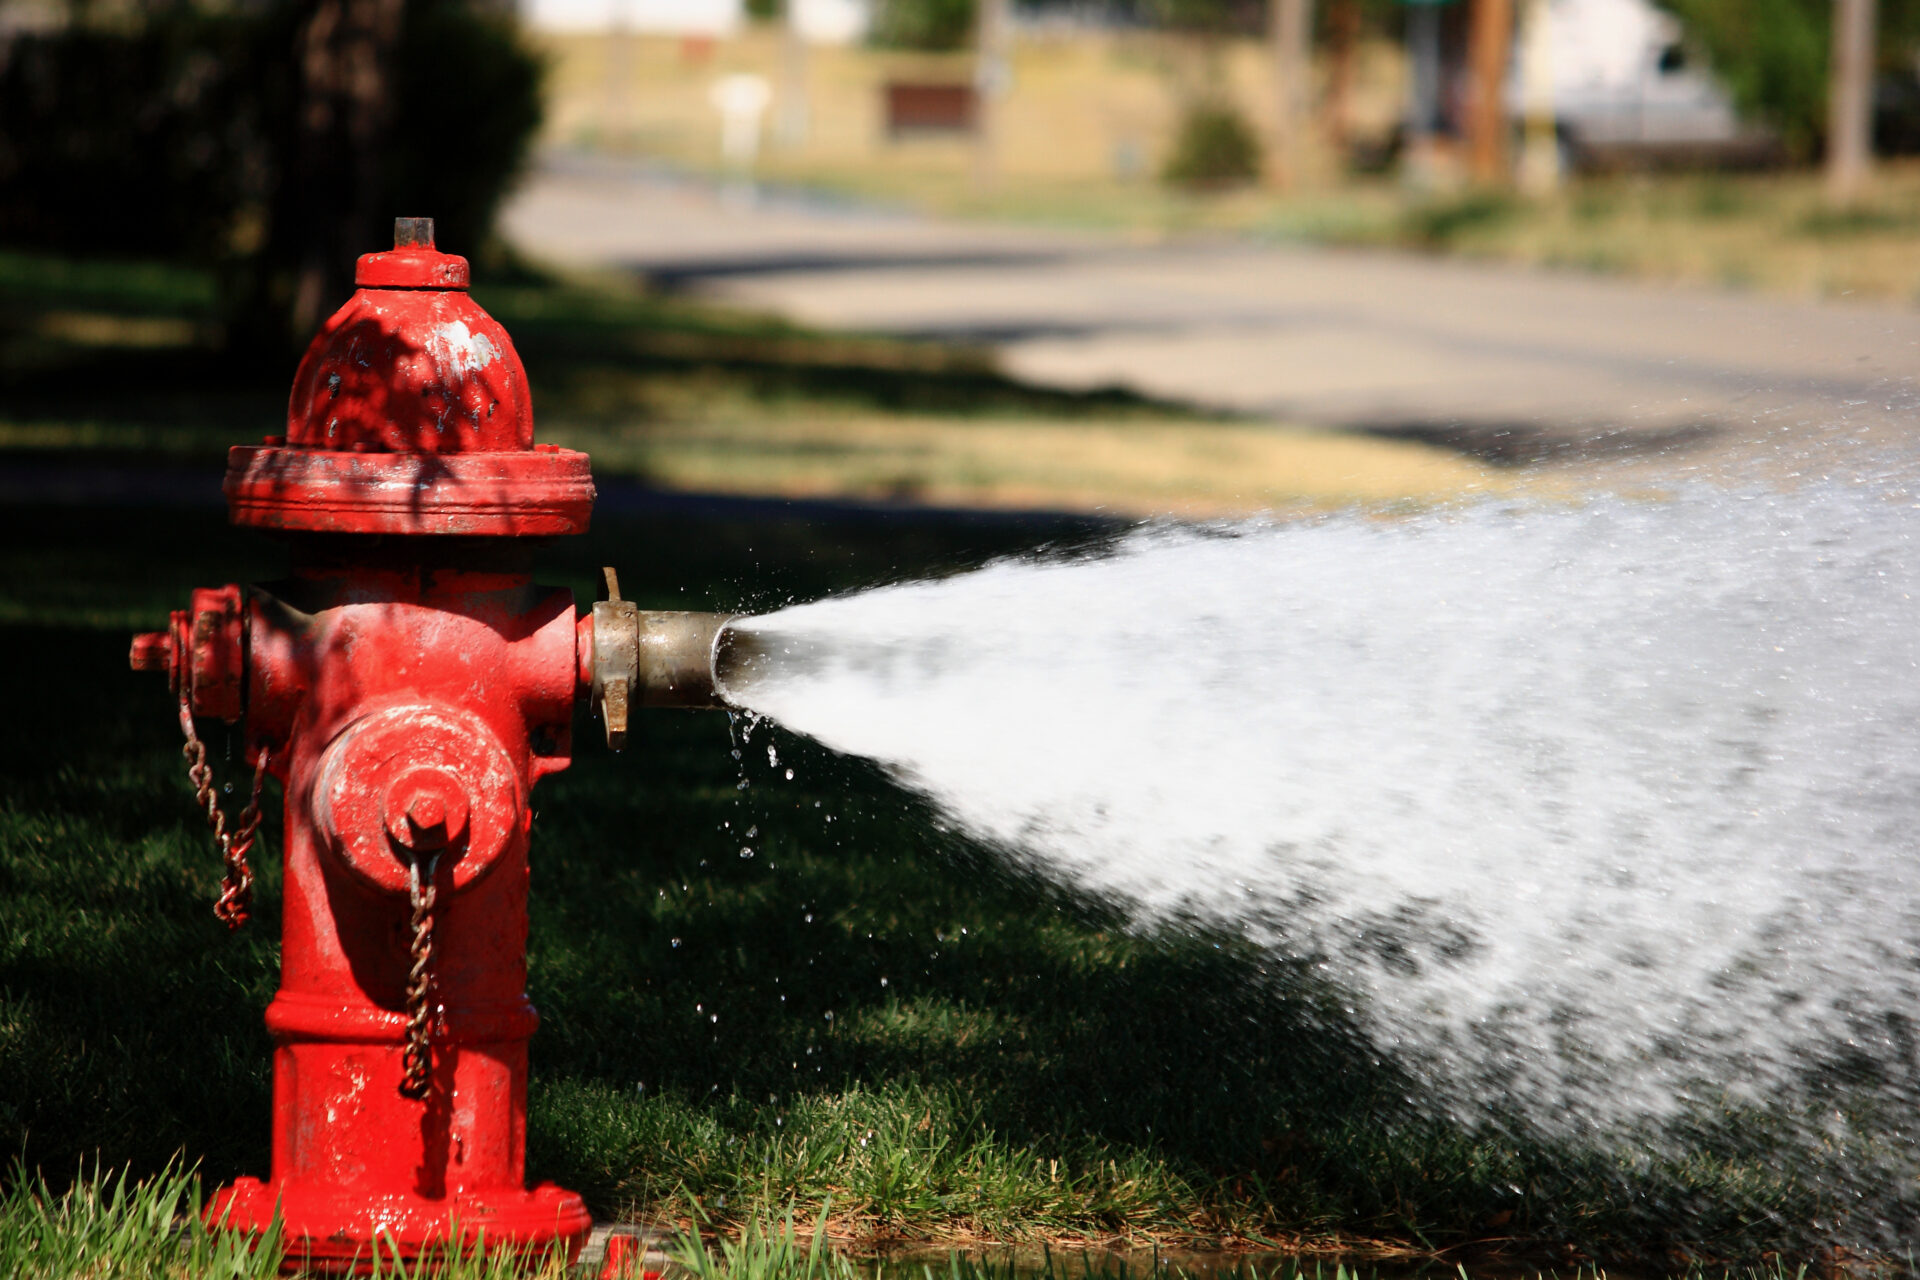 PSC Investigating State’s Fire Hydrants